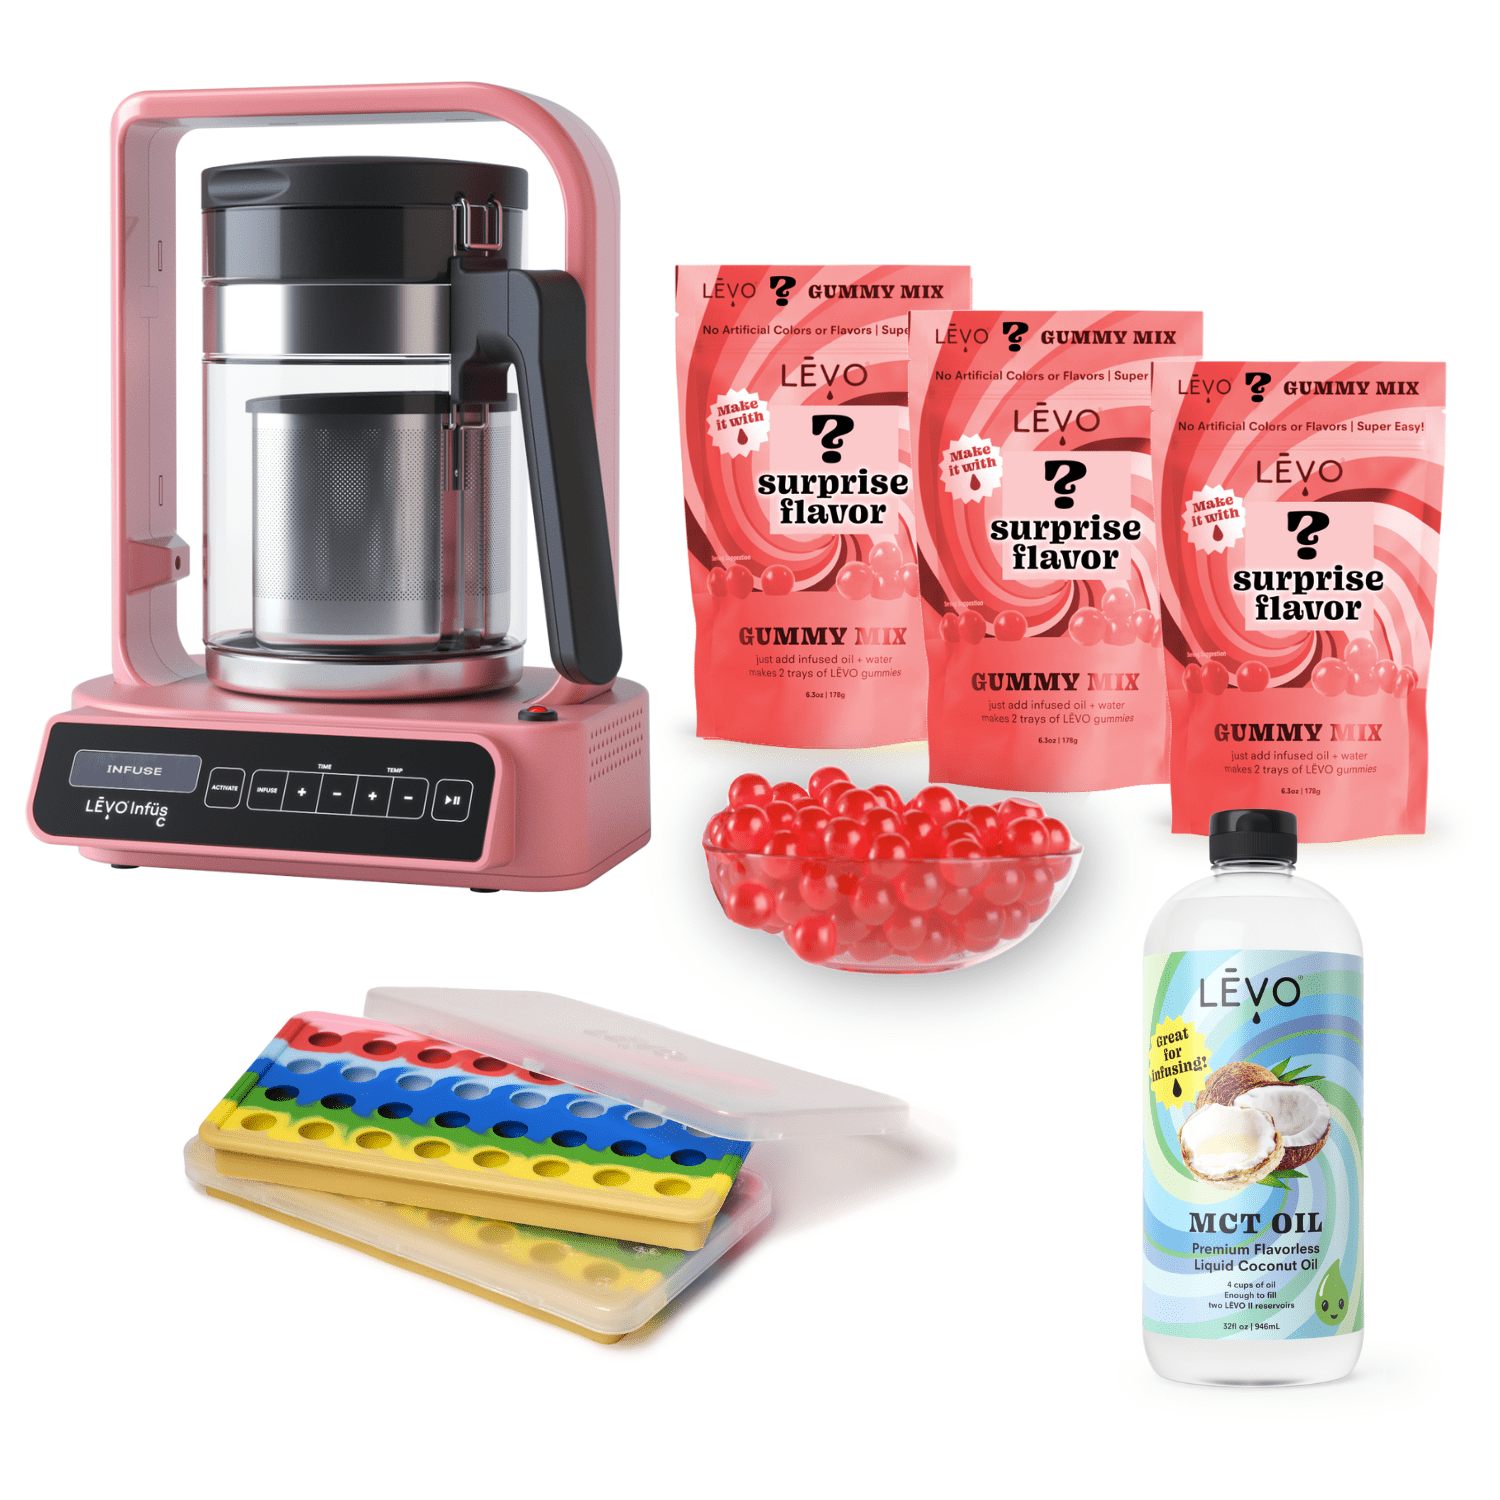 LEVO gummy making bundle with 3 gummy mix packs, MCT oil, and LEVO C machine. Enjoy the art of homemade gummies with LĒVO C and this bundle.